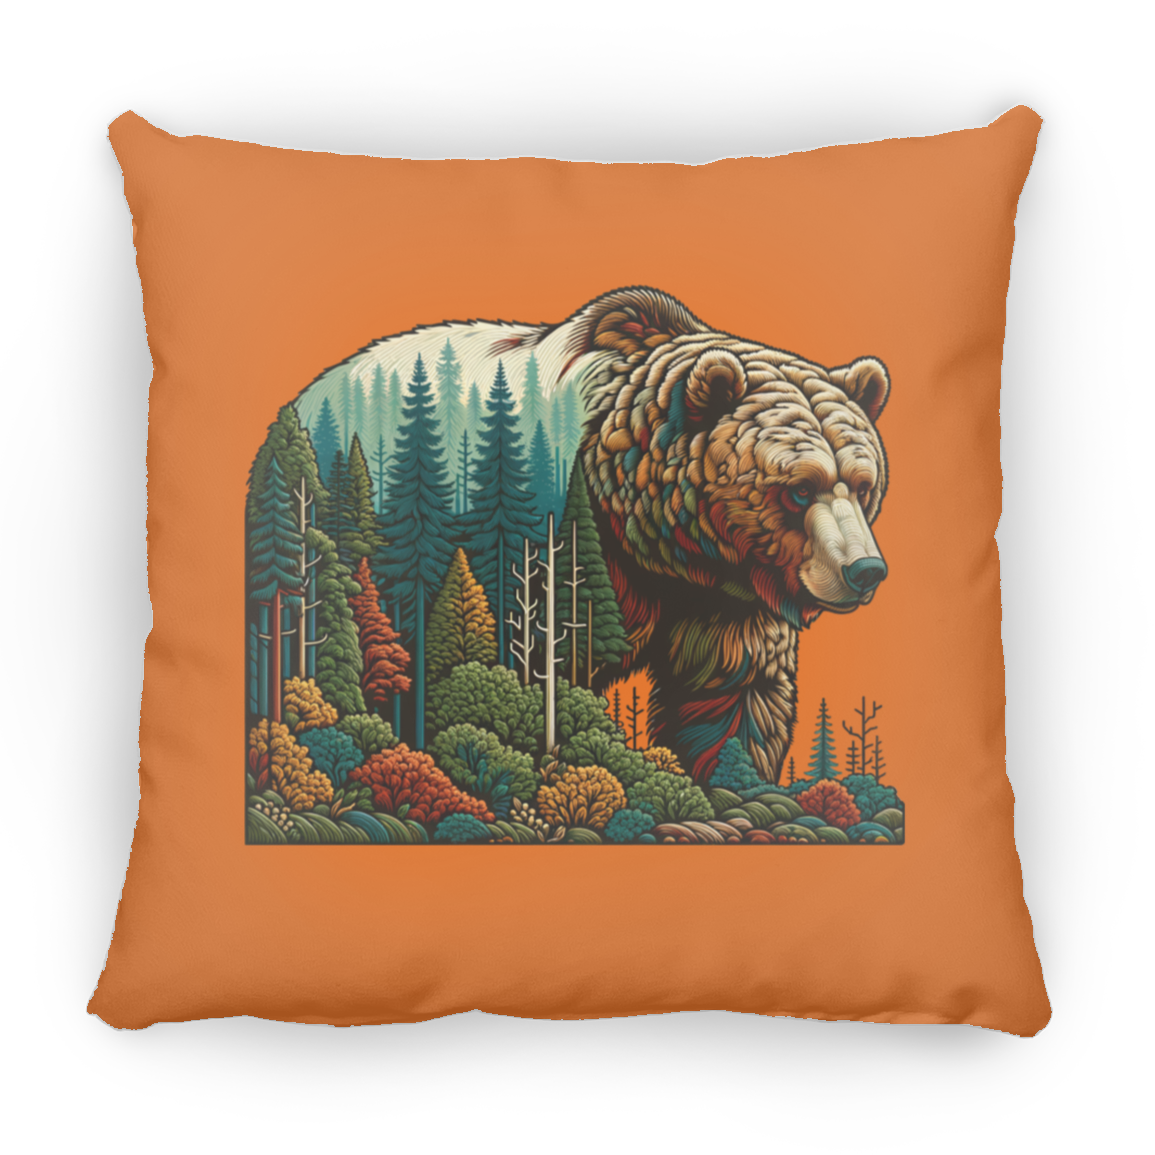 Guardian Grizzly - Pillows